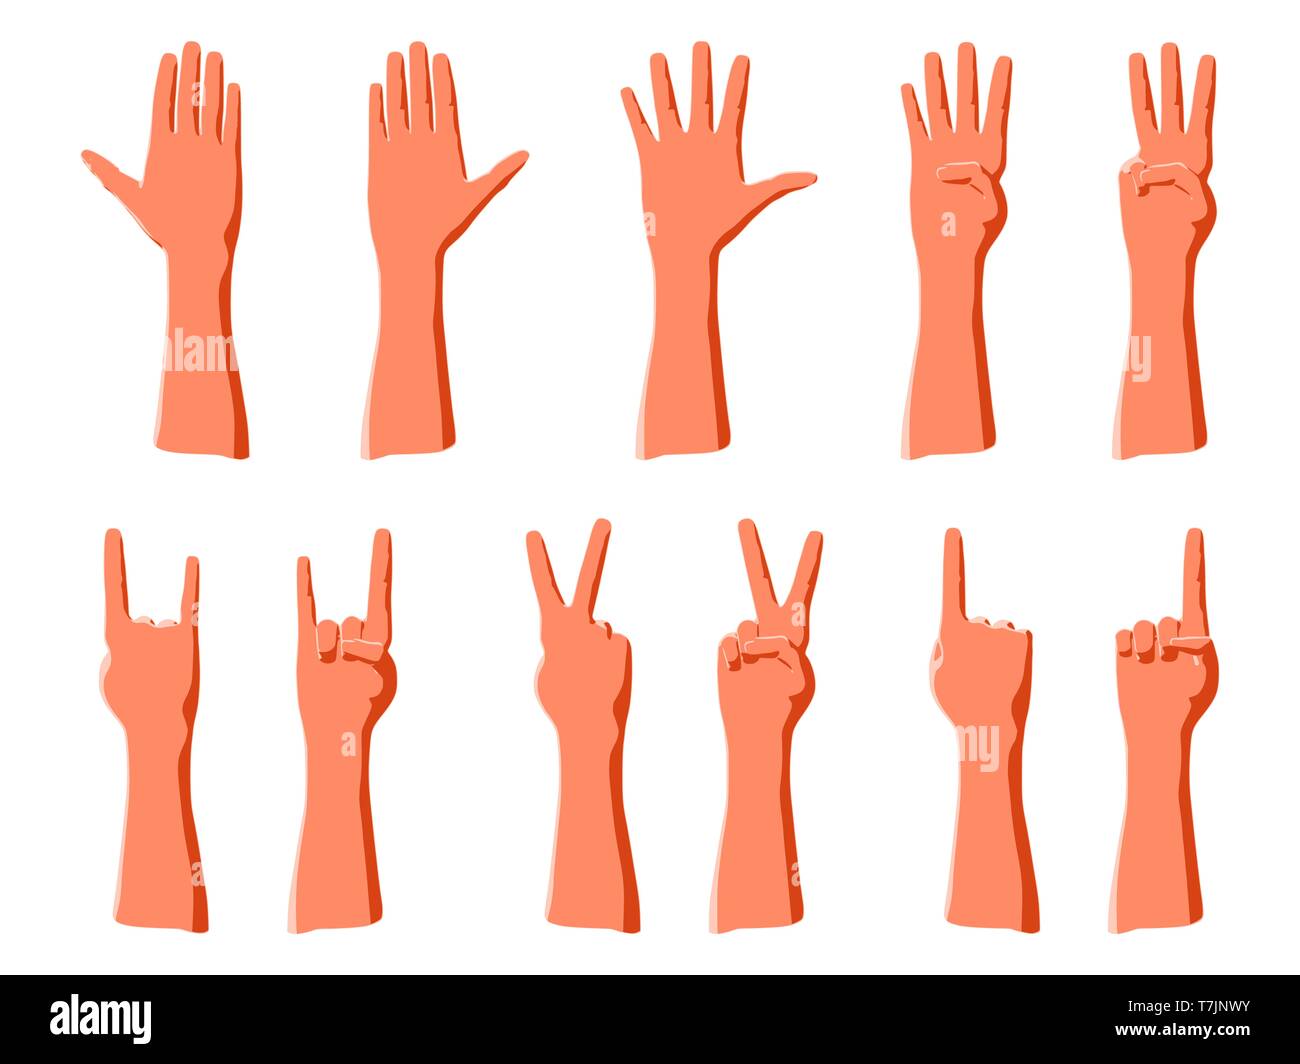 Counting from one to five by hands fingers or abstract gesturing for show emotions Stock Photo